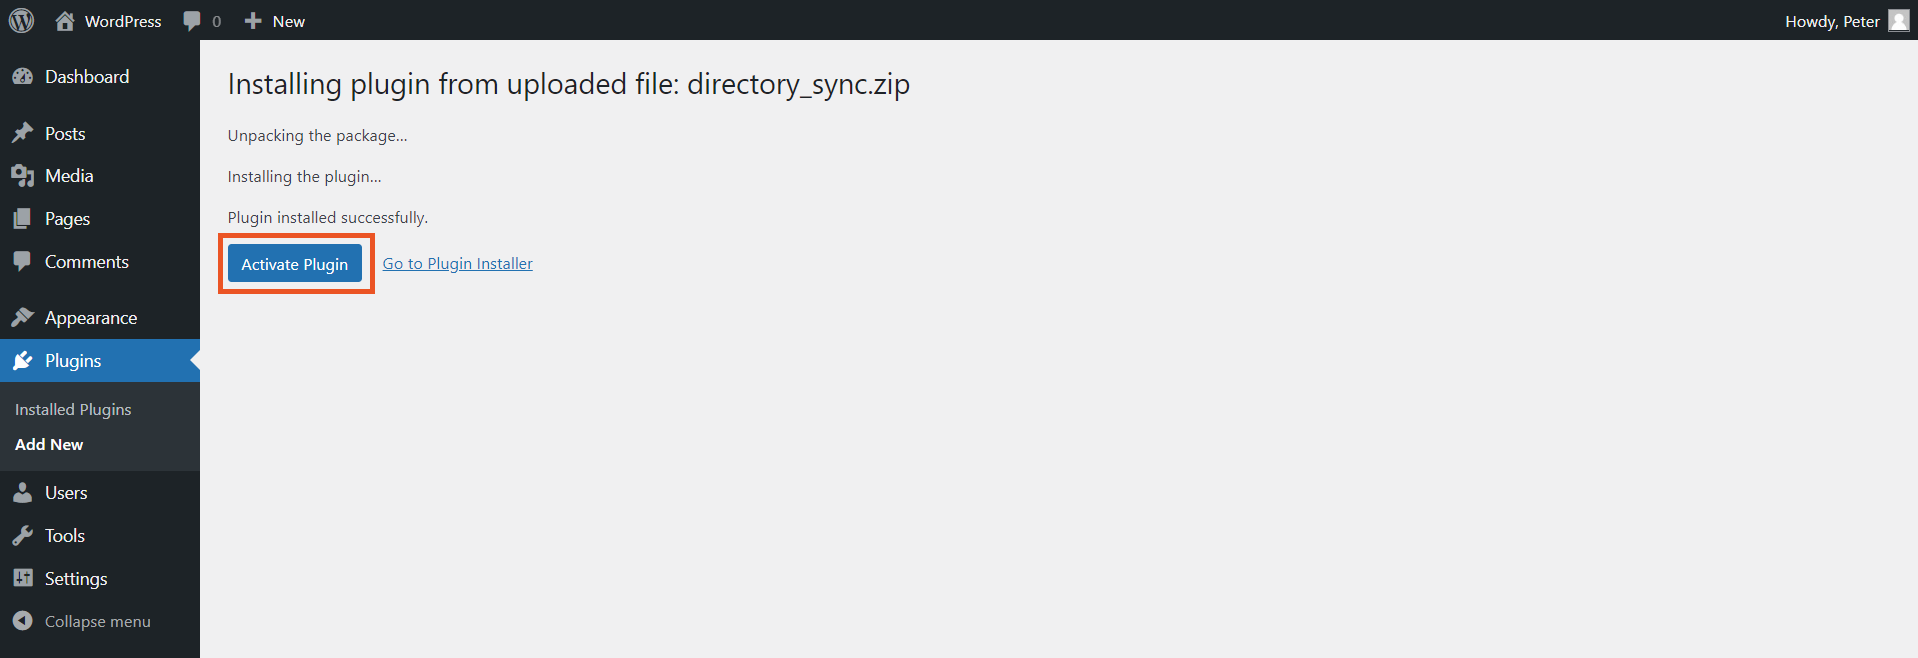 LDAP/active directory login for intranet sites directory sync add-on activate the add-on